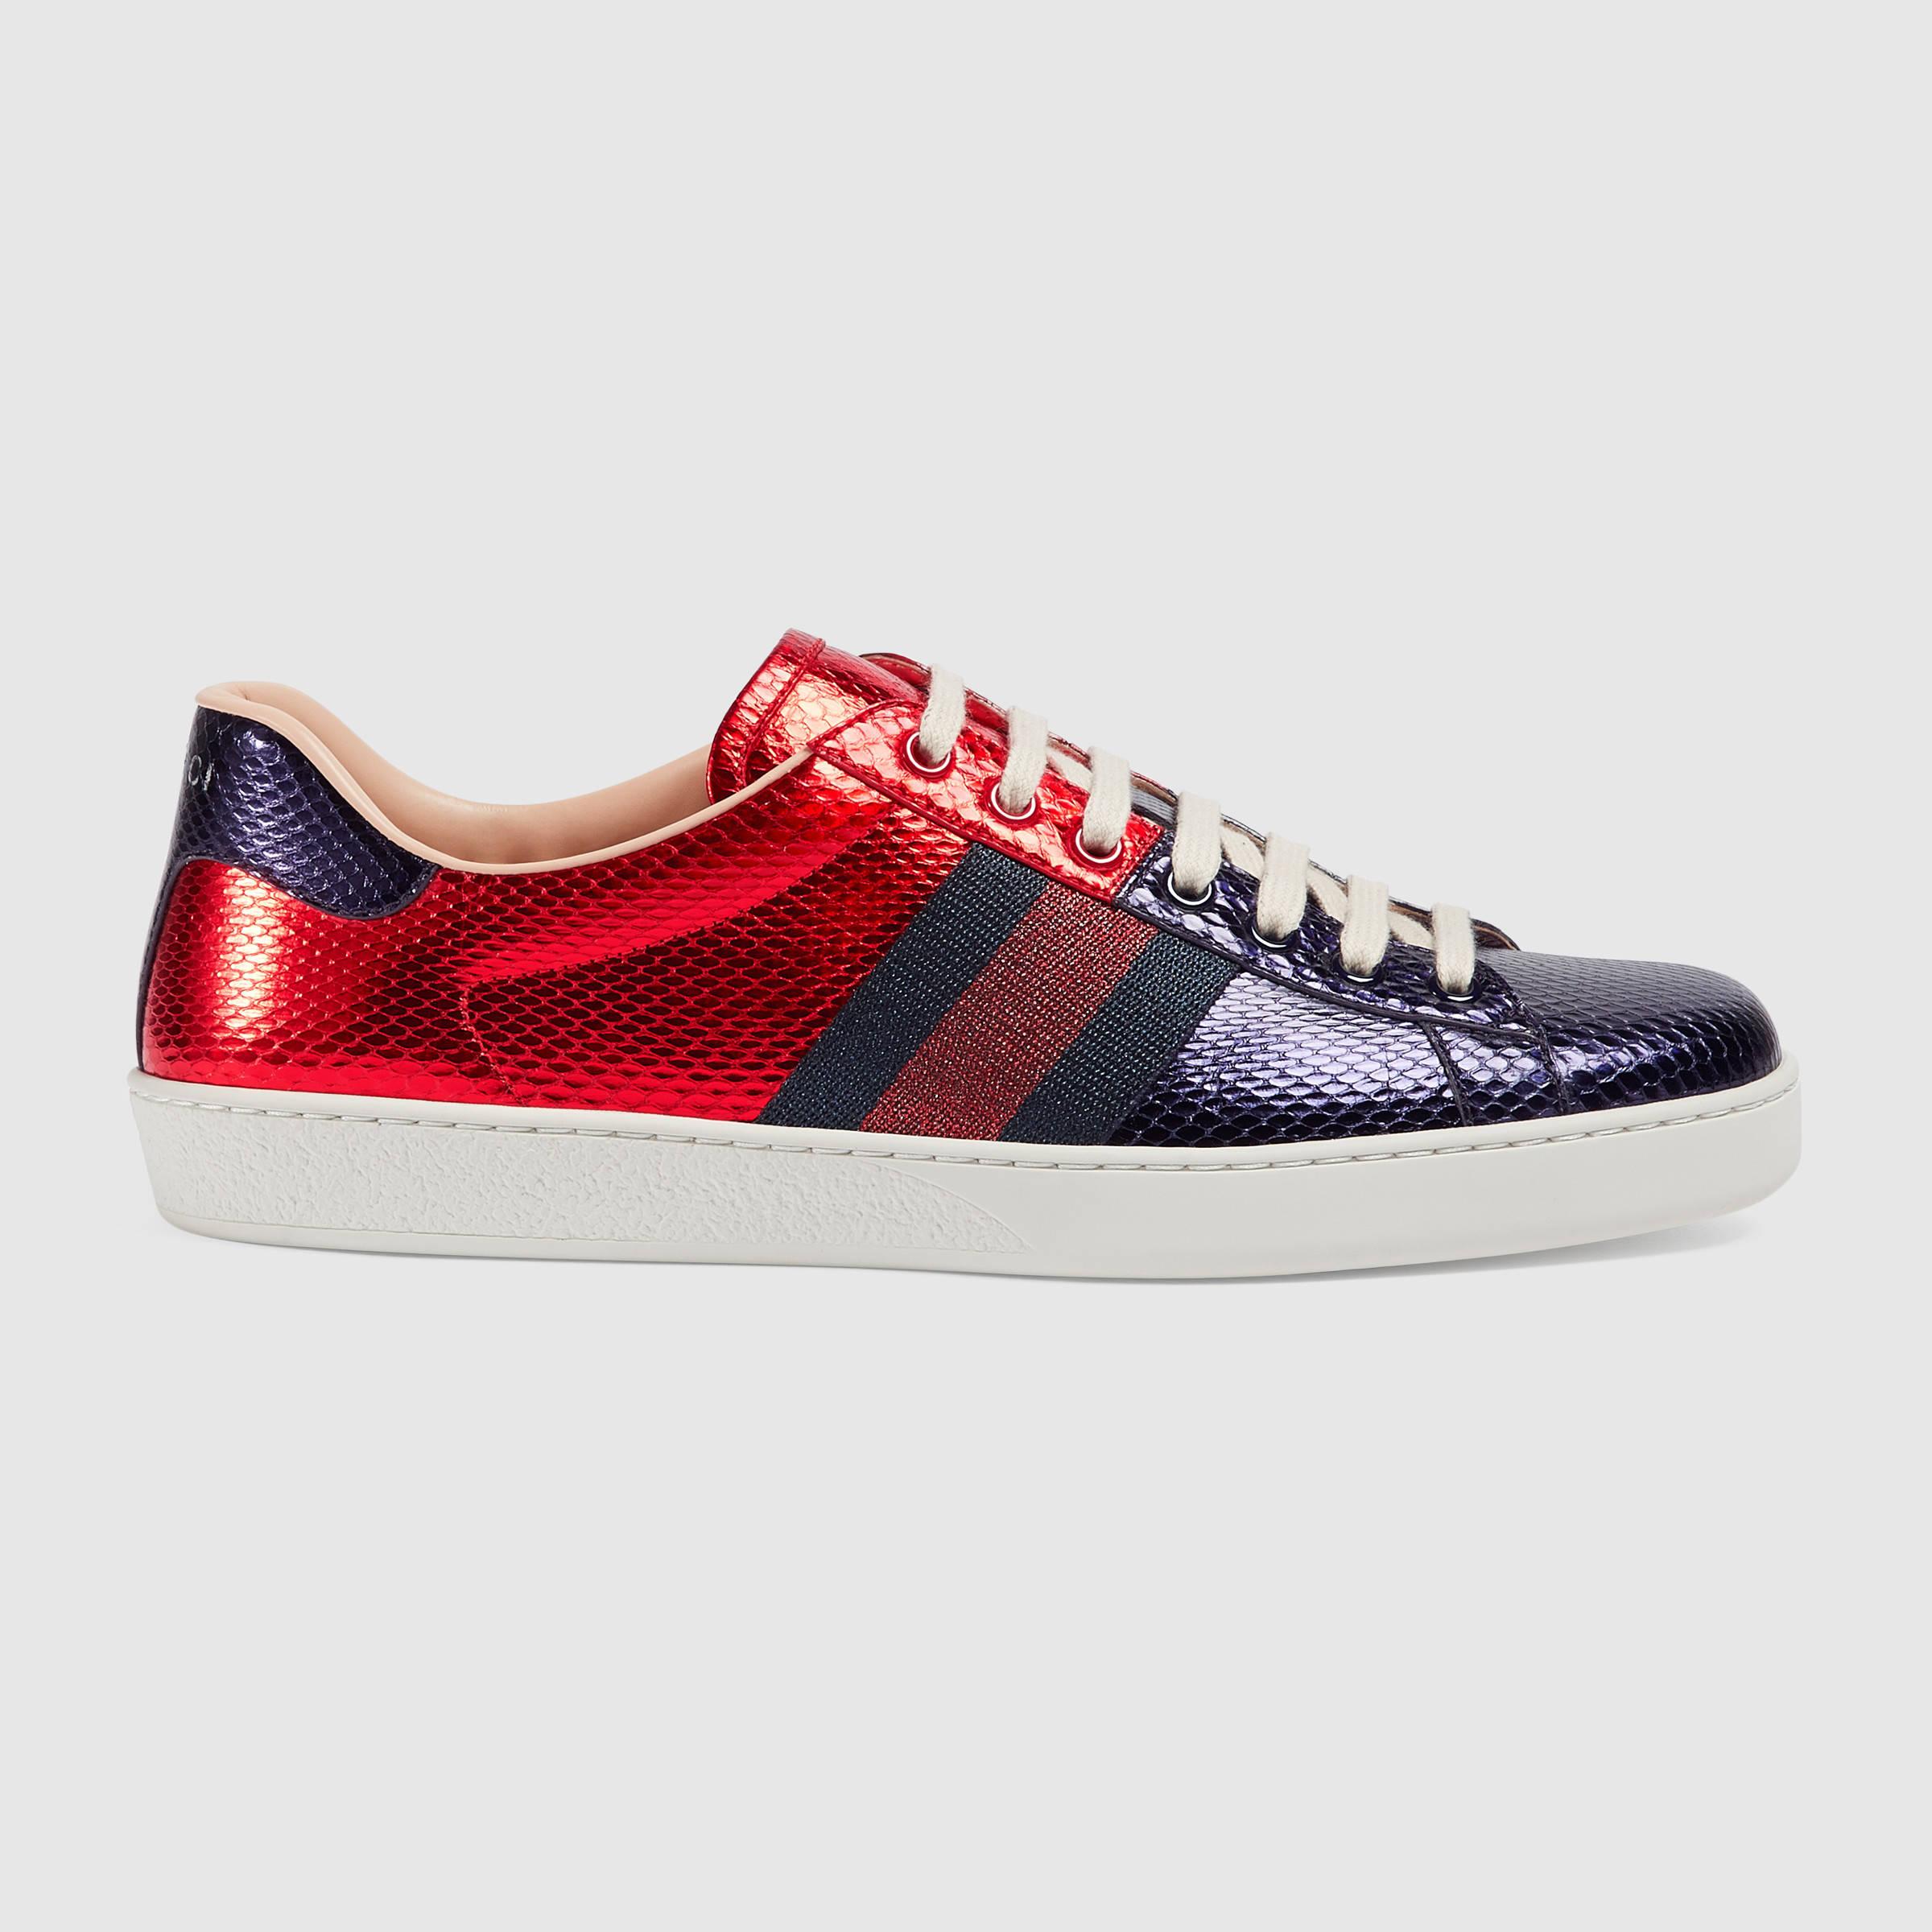 gucci sneakers blue and red, OFF 77 